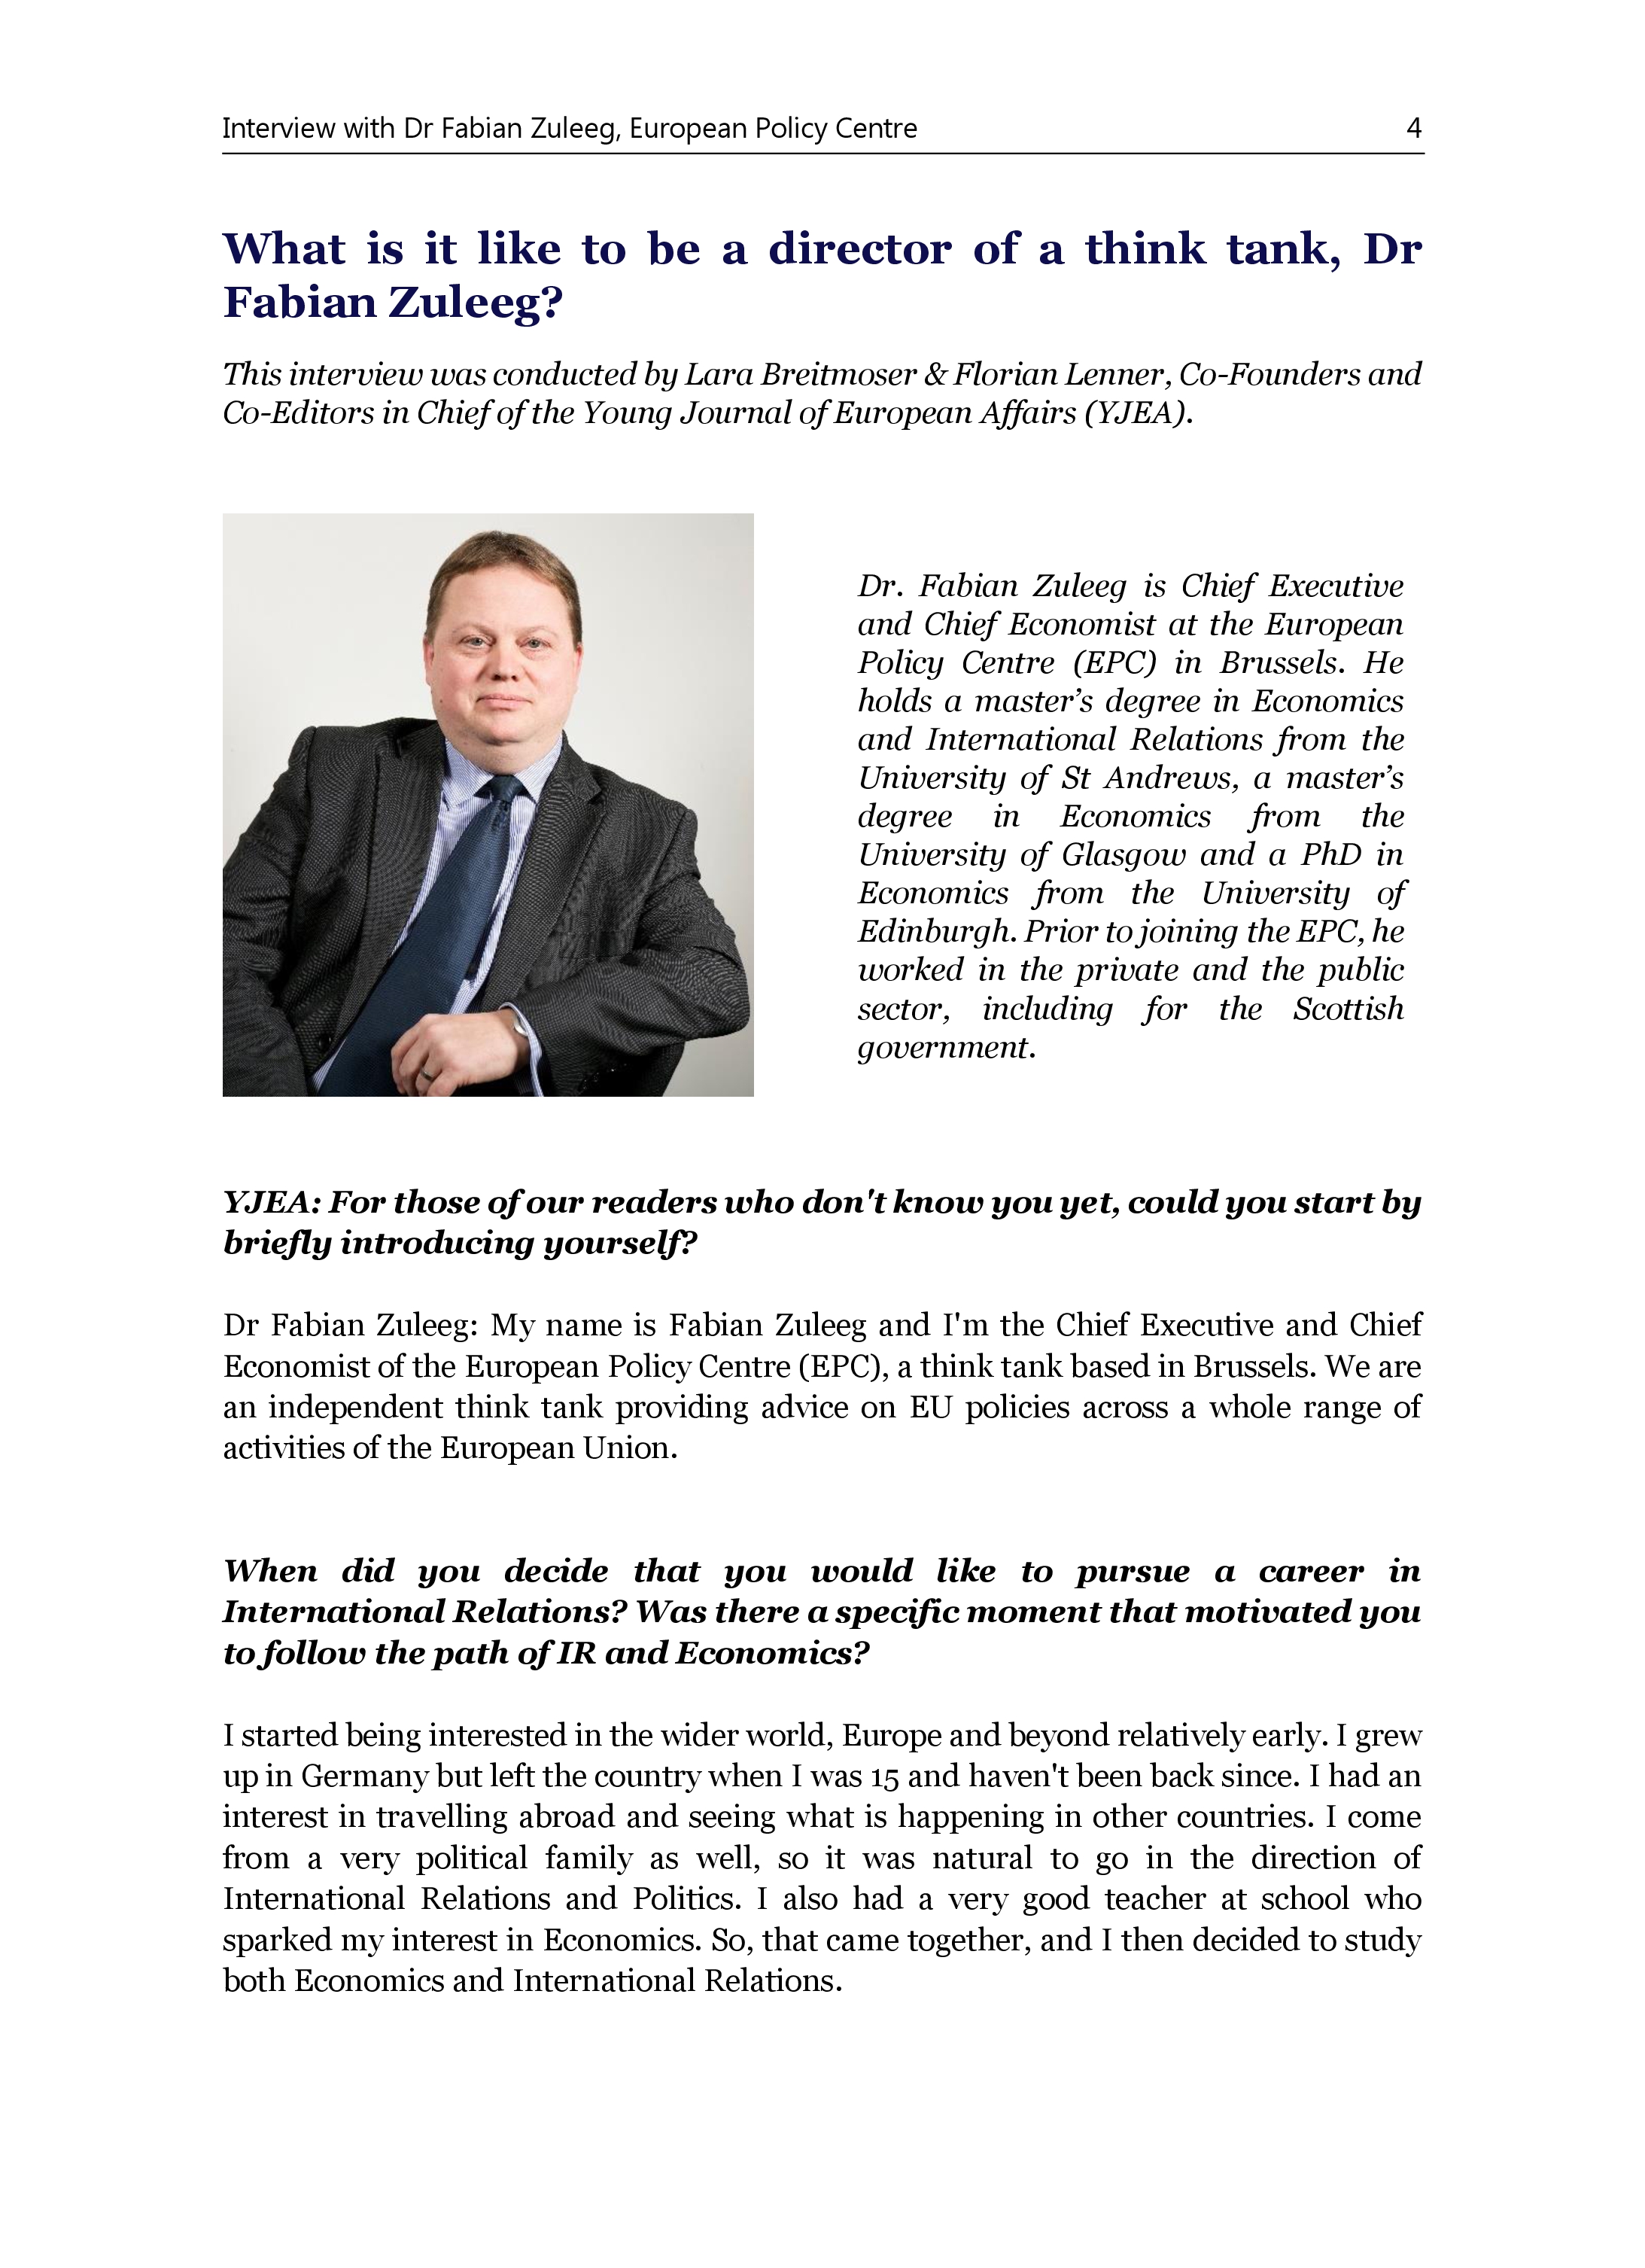 This is our interview with Dr Fabian Zuleeg, Chief Executive and Chief Economist of the European Policy Centre (EPC)